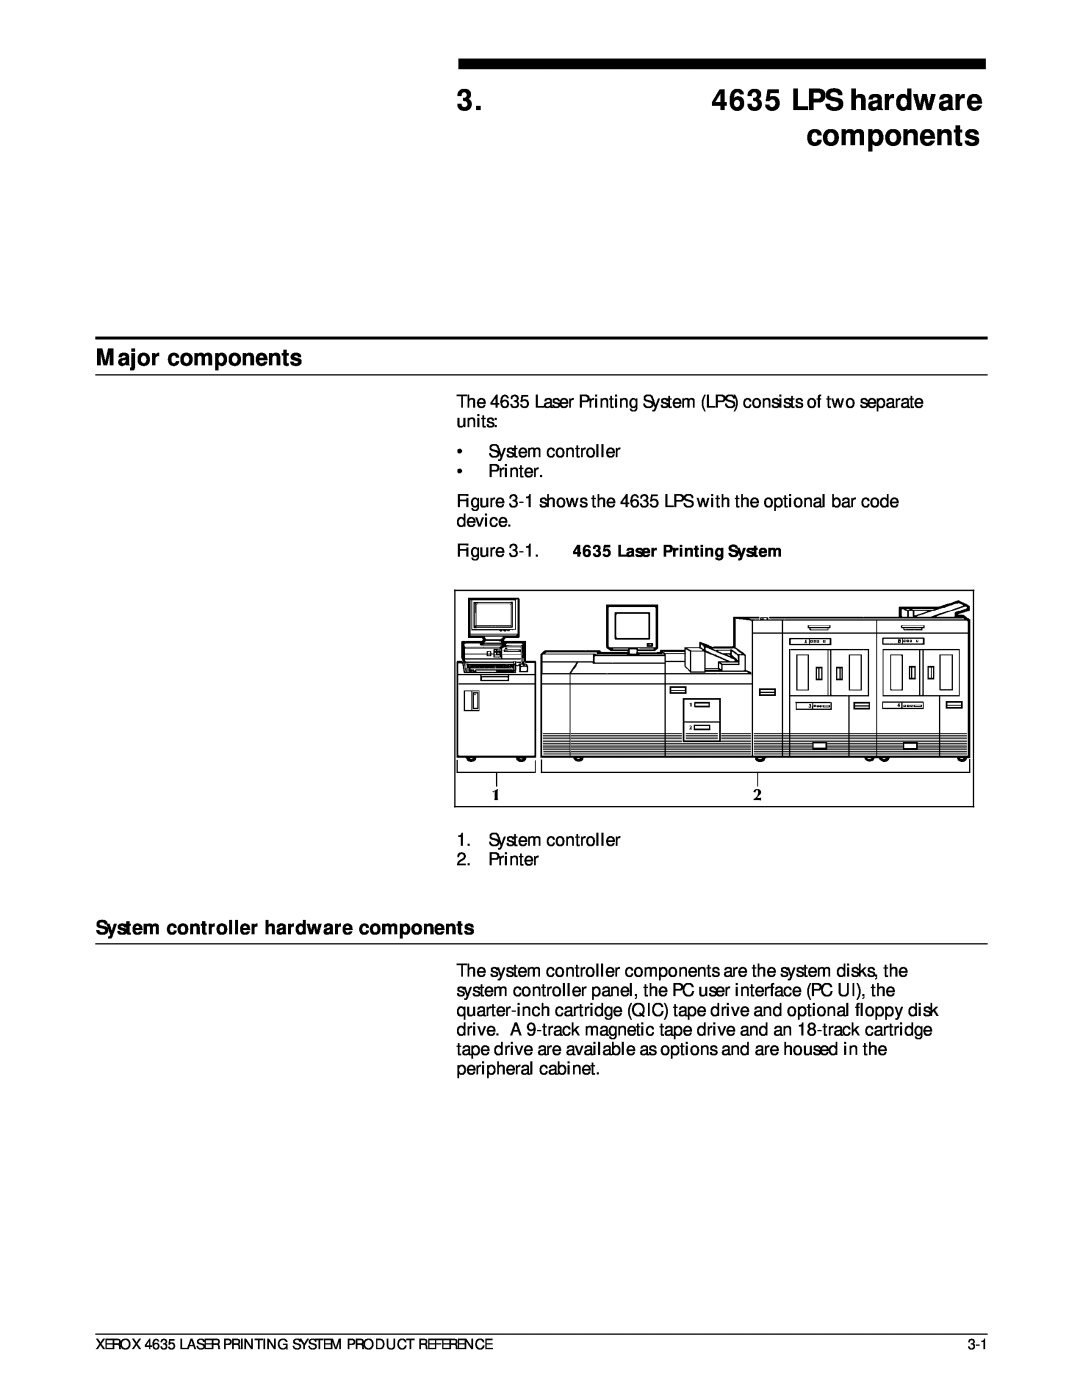 Xerox 721P83071 manual Major components, System controller hardware components, LPS hardware components 